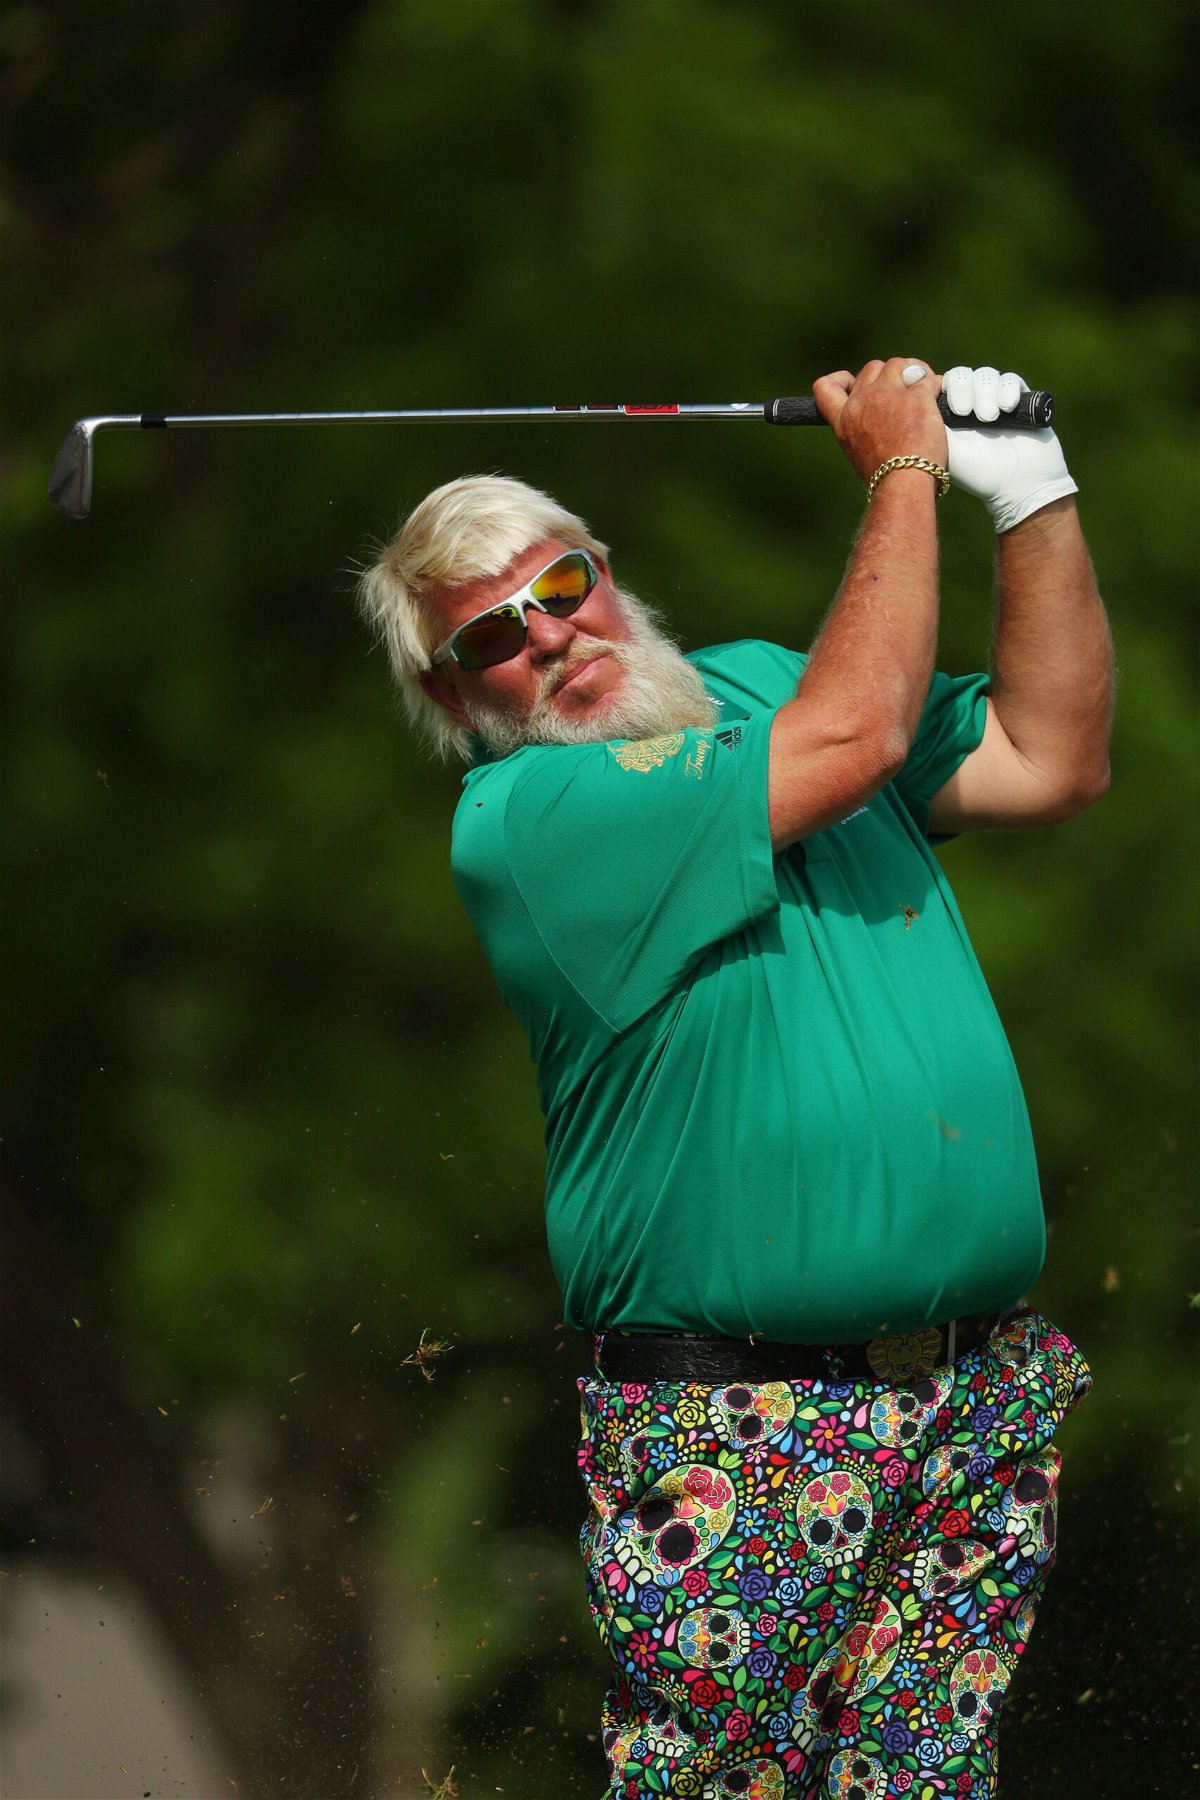 <i>Andrew Redington/Getty Images</i><br/>John Daly is living life to the fullest at the PGA Championship. Daly is seen playing his shot from the 11th tee during the first round of the 2022 PGA Championship.